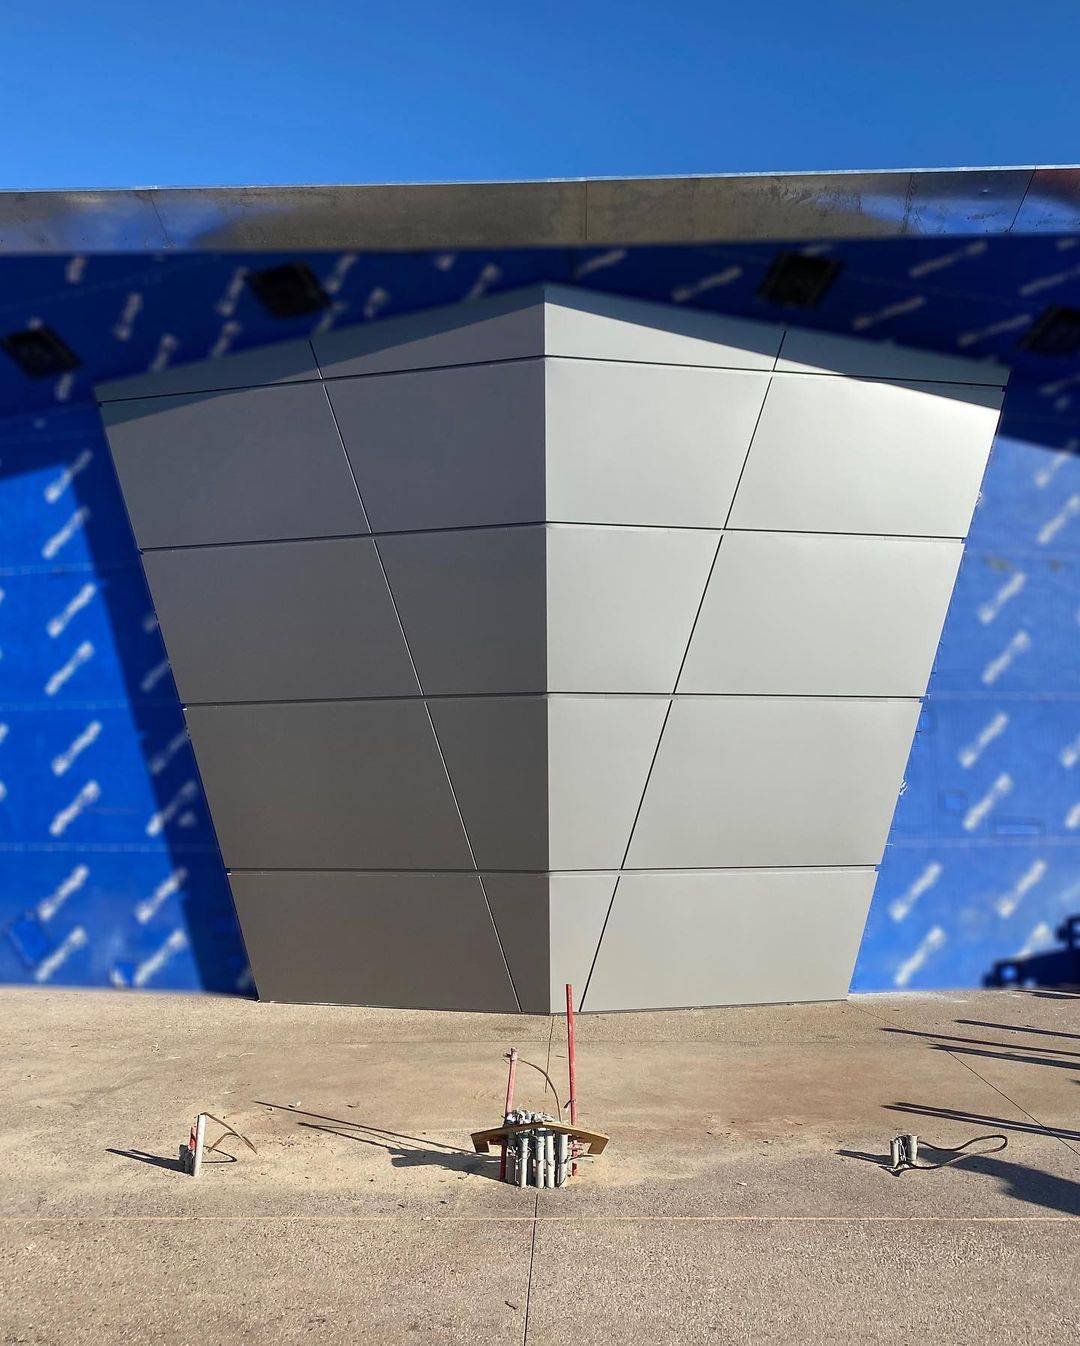 Disney Imagineer shares first look at the exterior metal panels that will form the entrance to Guardians of the Galaxy Cosmic Rewind at EPCOT